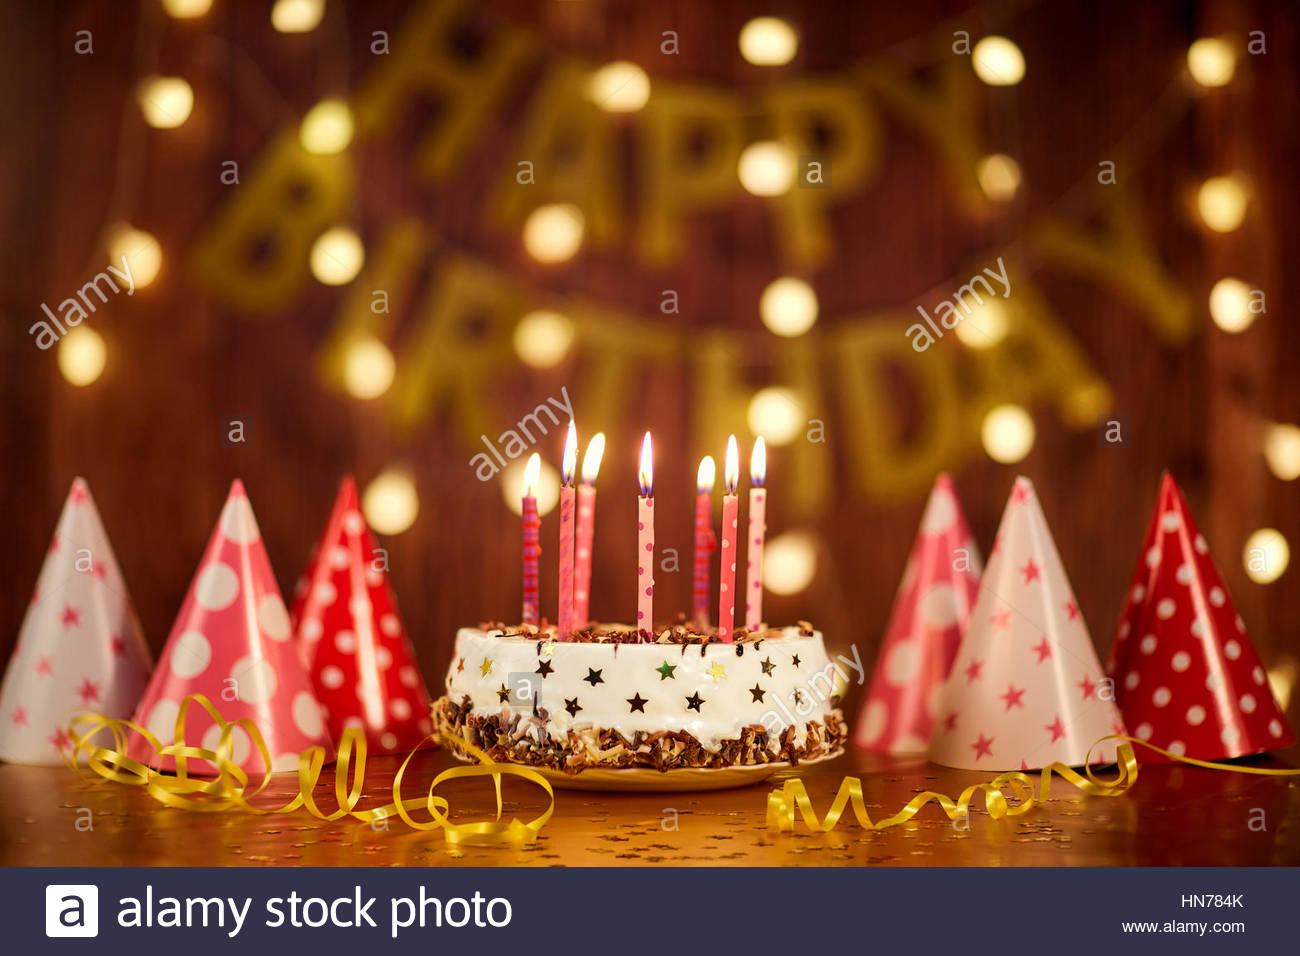 Candles Happy BirtHDay Cake HD Wallpaper Quality